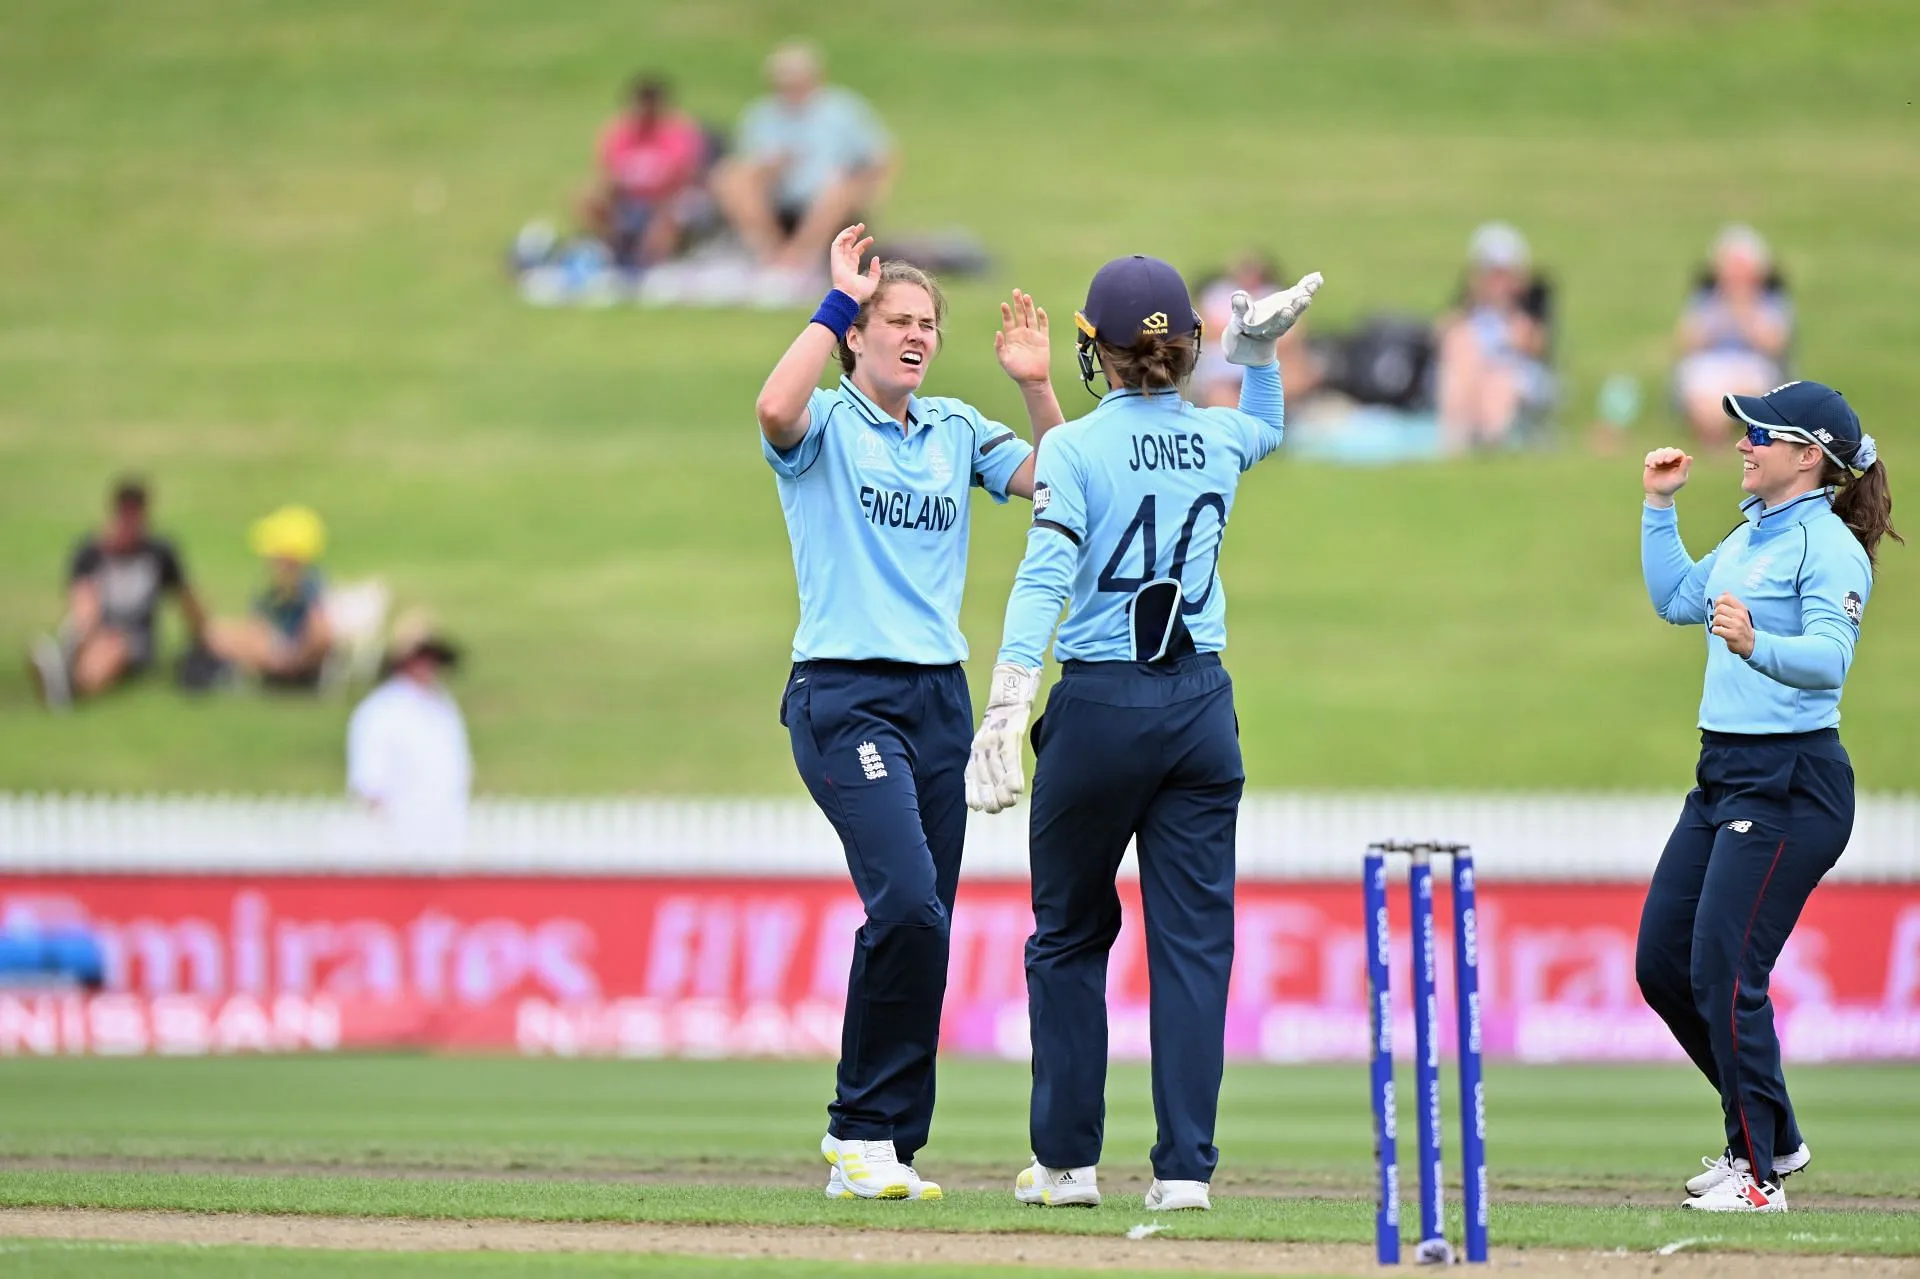 ICC Women's World Cup 2022, Match 13: South Africa Women vs England Women Full Preview, Match Details, Probable XIs, Pitch Report, and Dream11 Team Prediction | SportzPoint.com